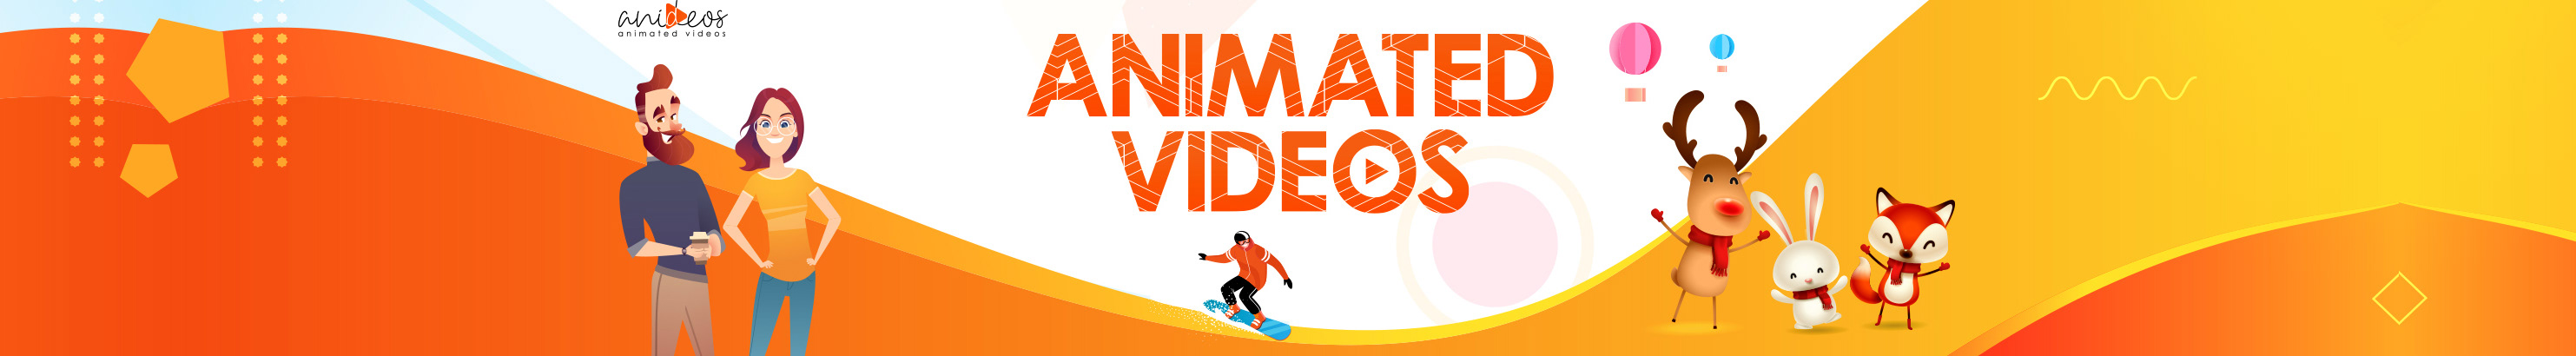 Anideos - Animated Videos's profile banner